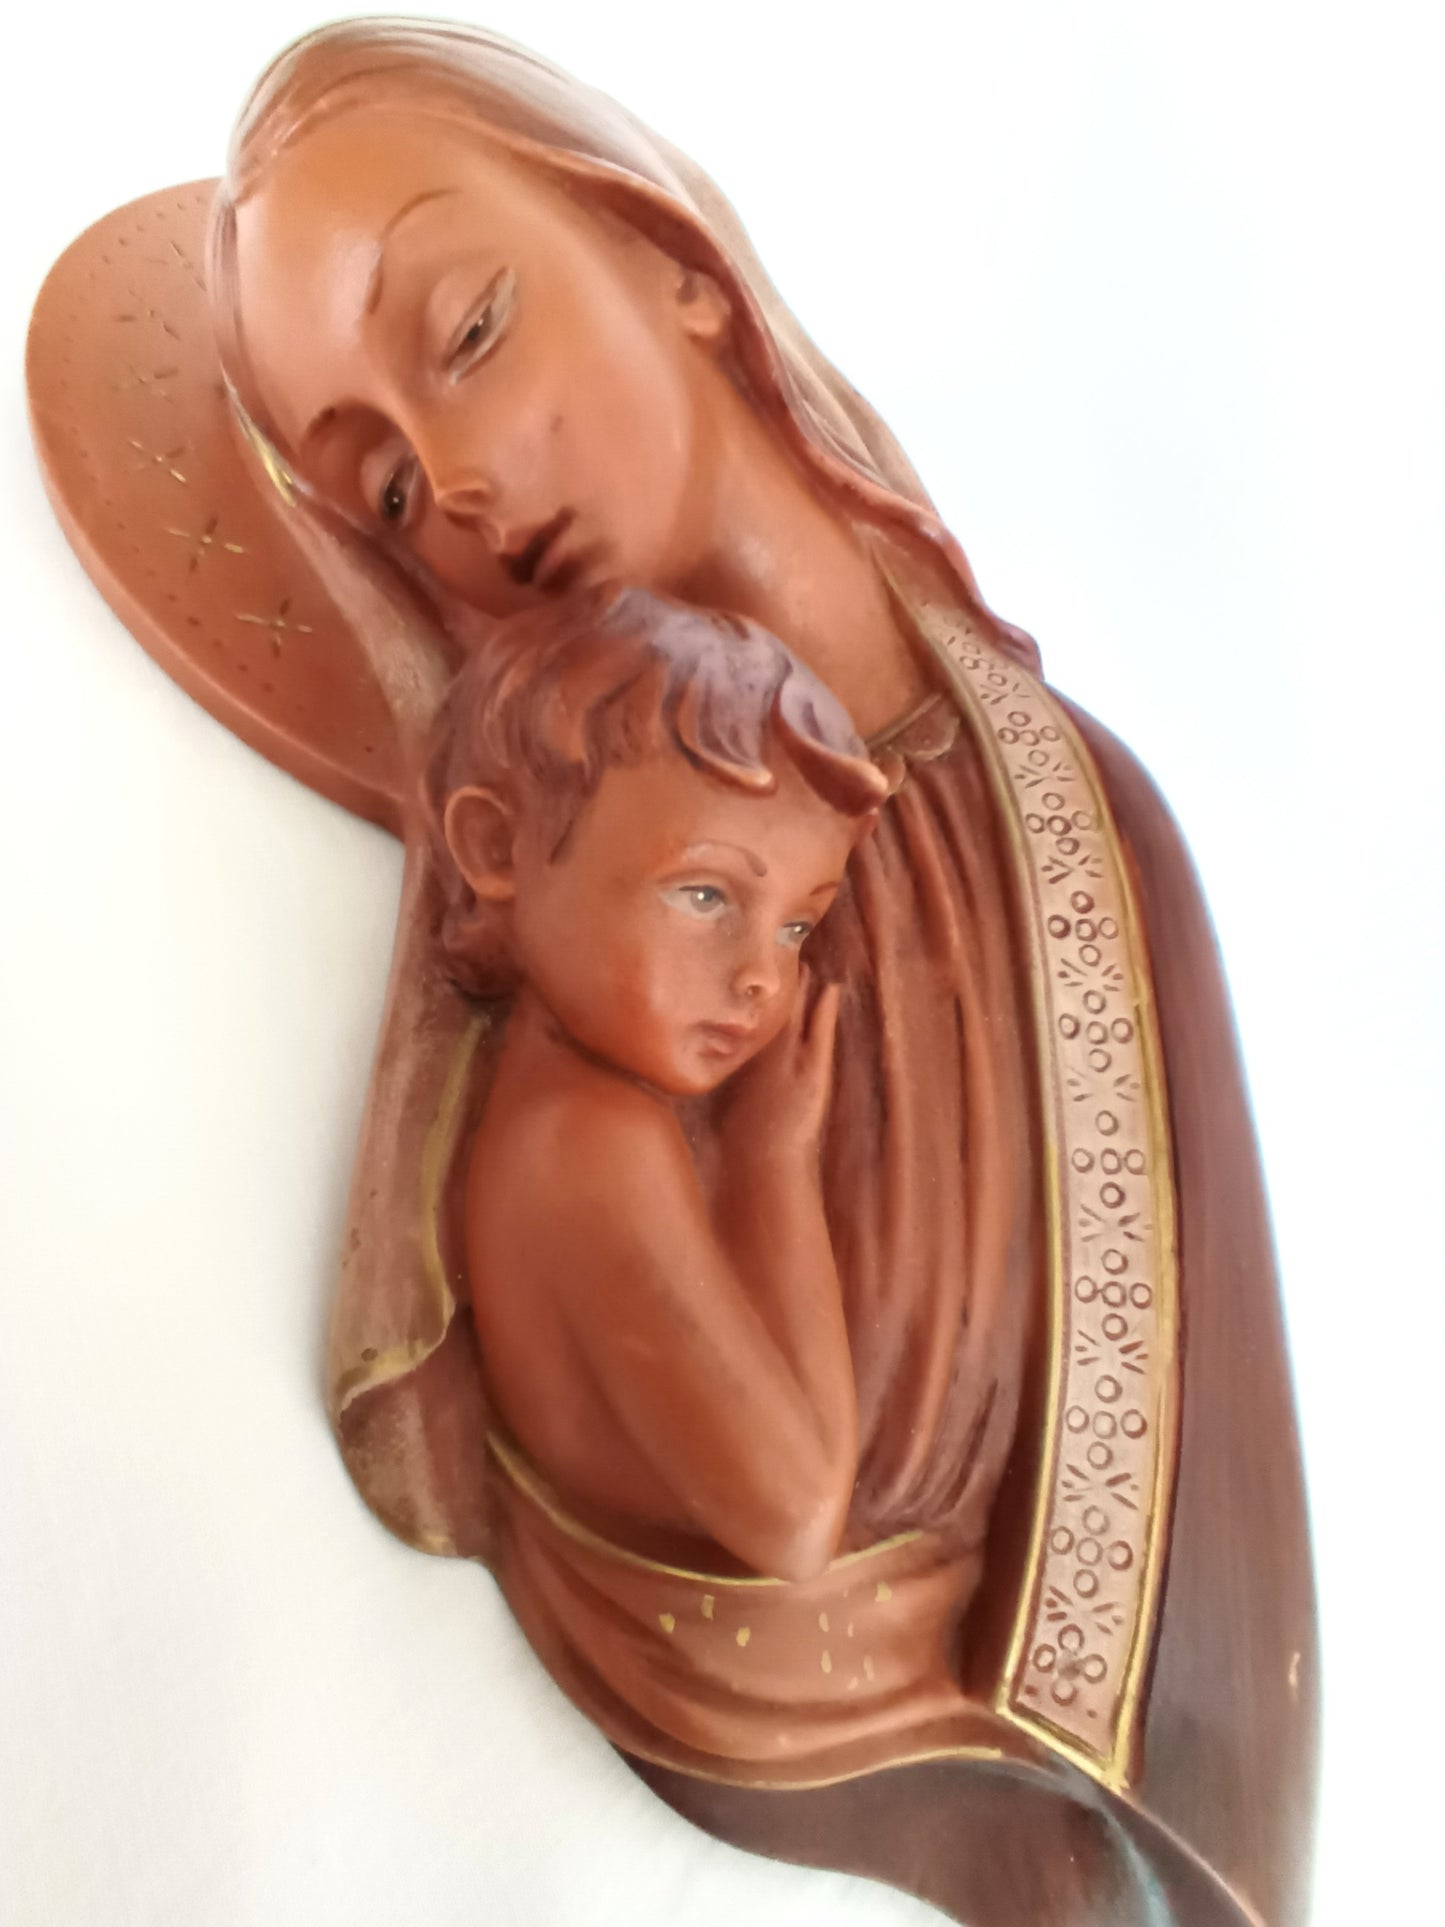 Vintage Gilded Ceramic Stoneware Madonna with Child Jesus Wall Hanging Figurine Religious Statuette Relief Wall Plaque-Made in Italy